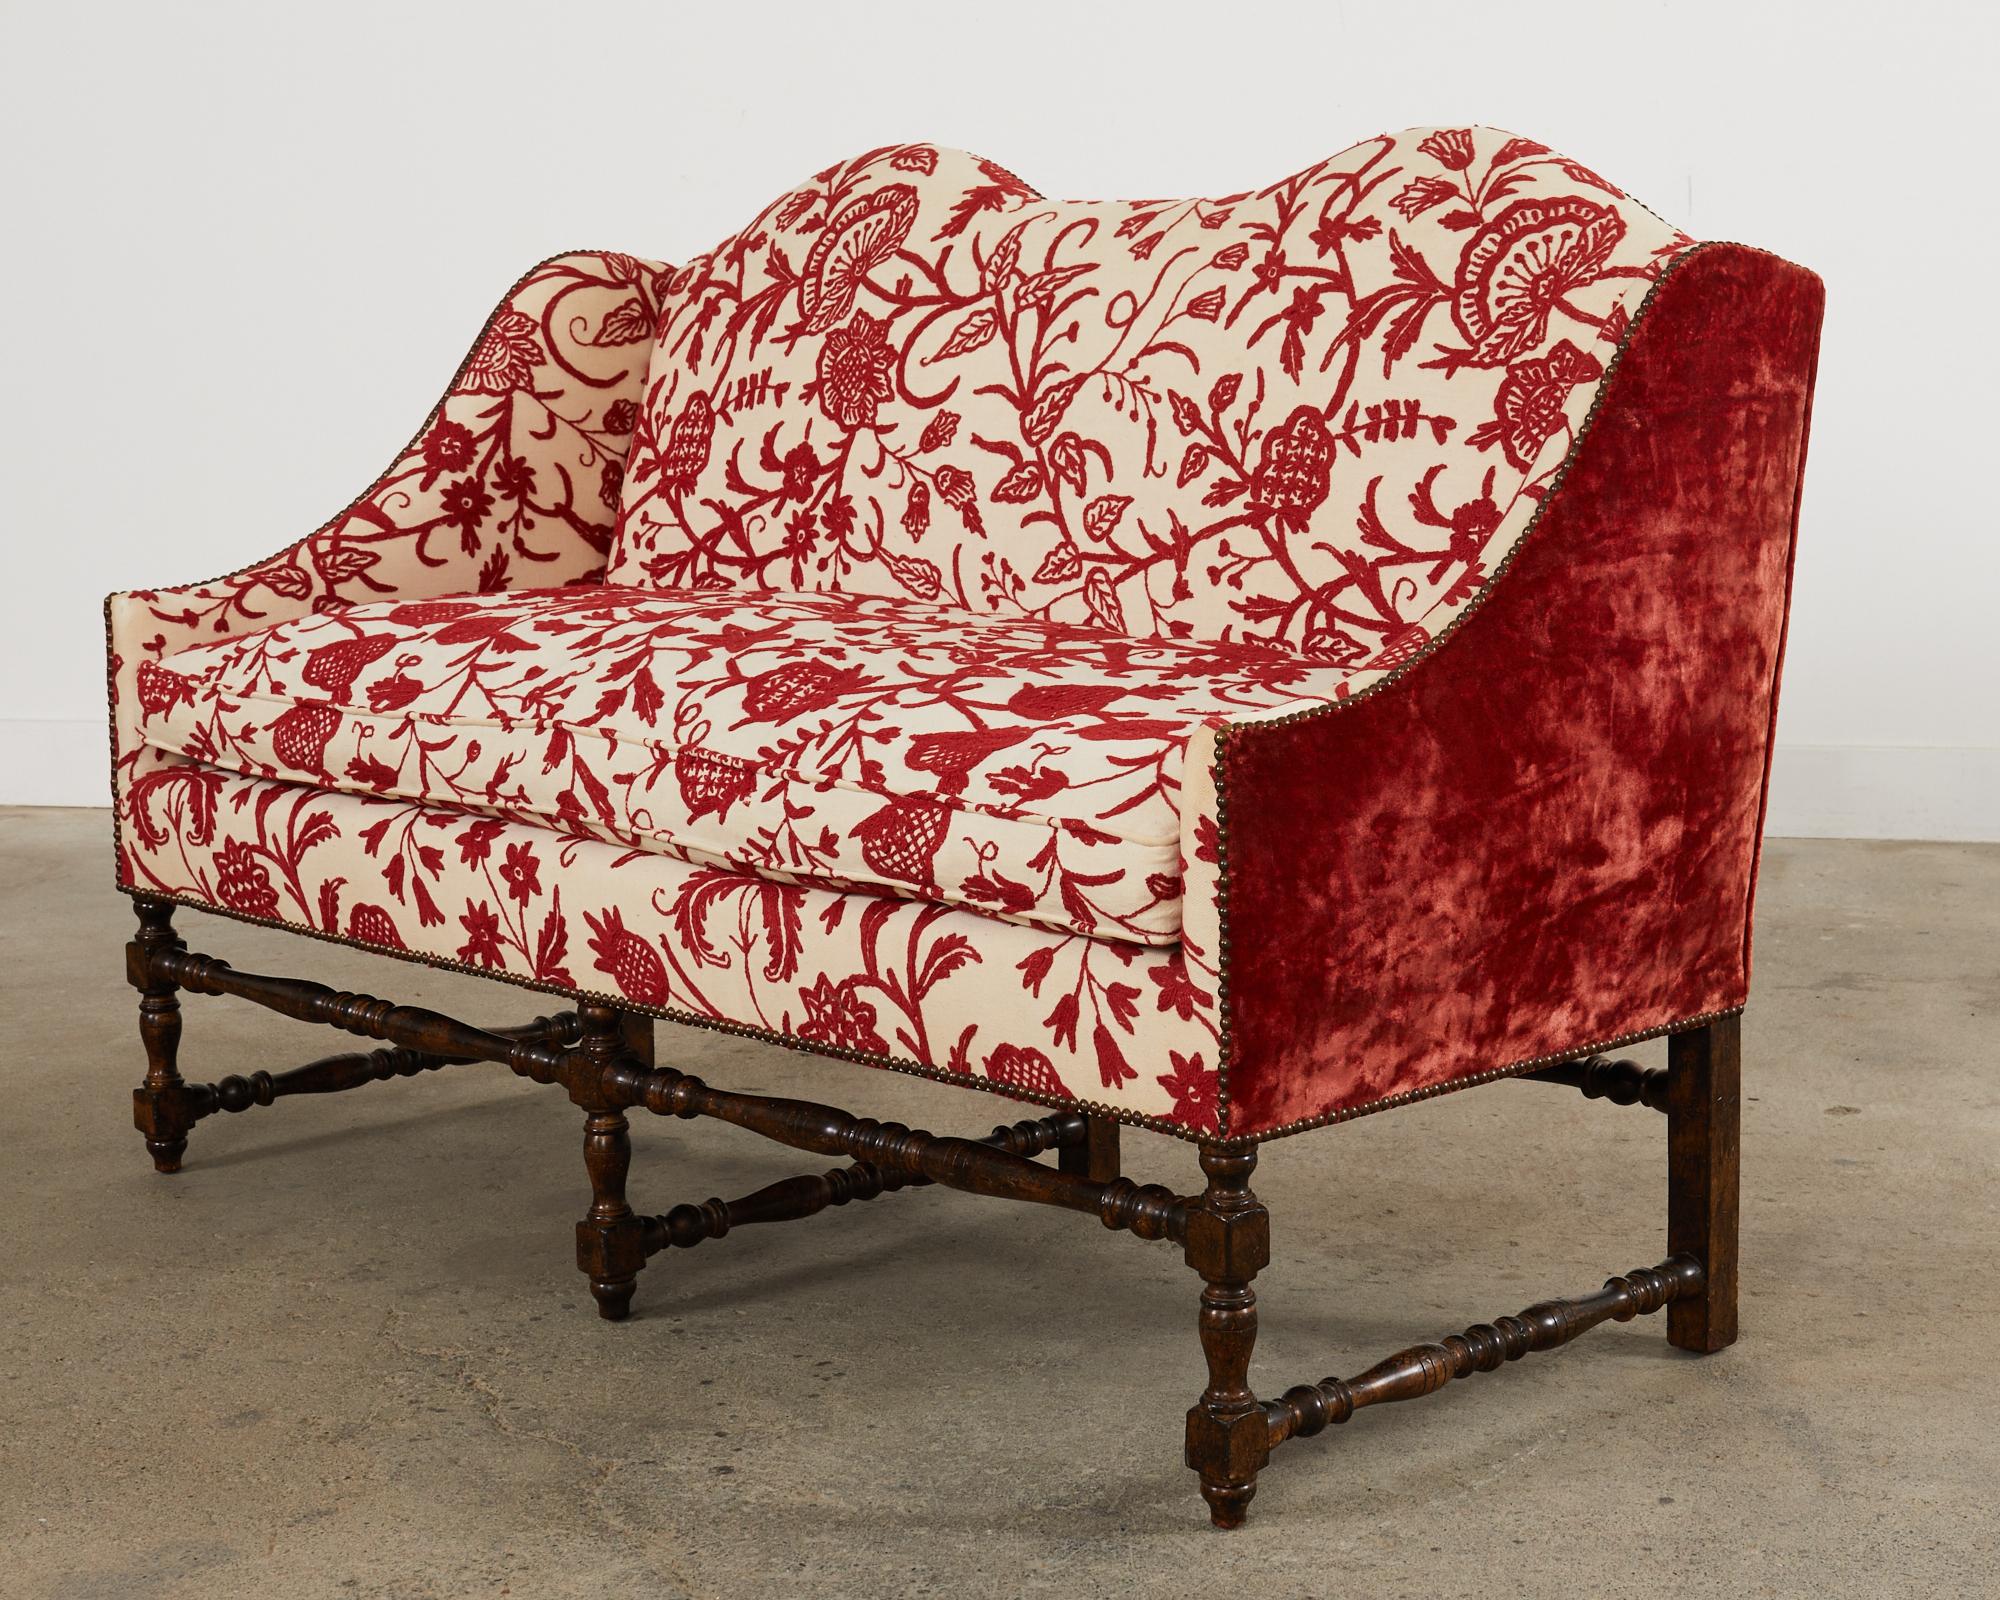 Charming William and Mary or country English style walnut settee custom made by Louis Mittman. The settee features a beautifully crafted walnut frame upholstered in a Brunschwig and Fils style crewel work fabric. The fabric has a spectacular floral